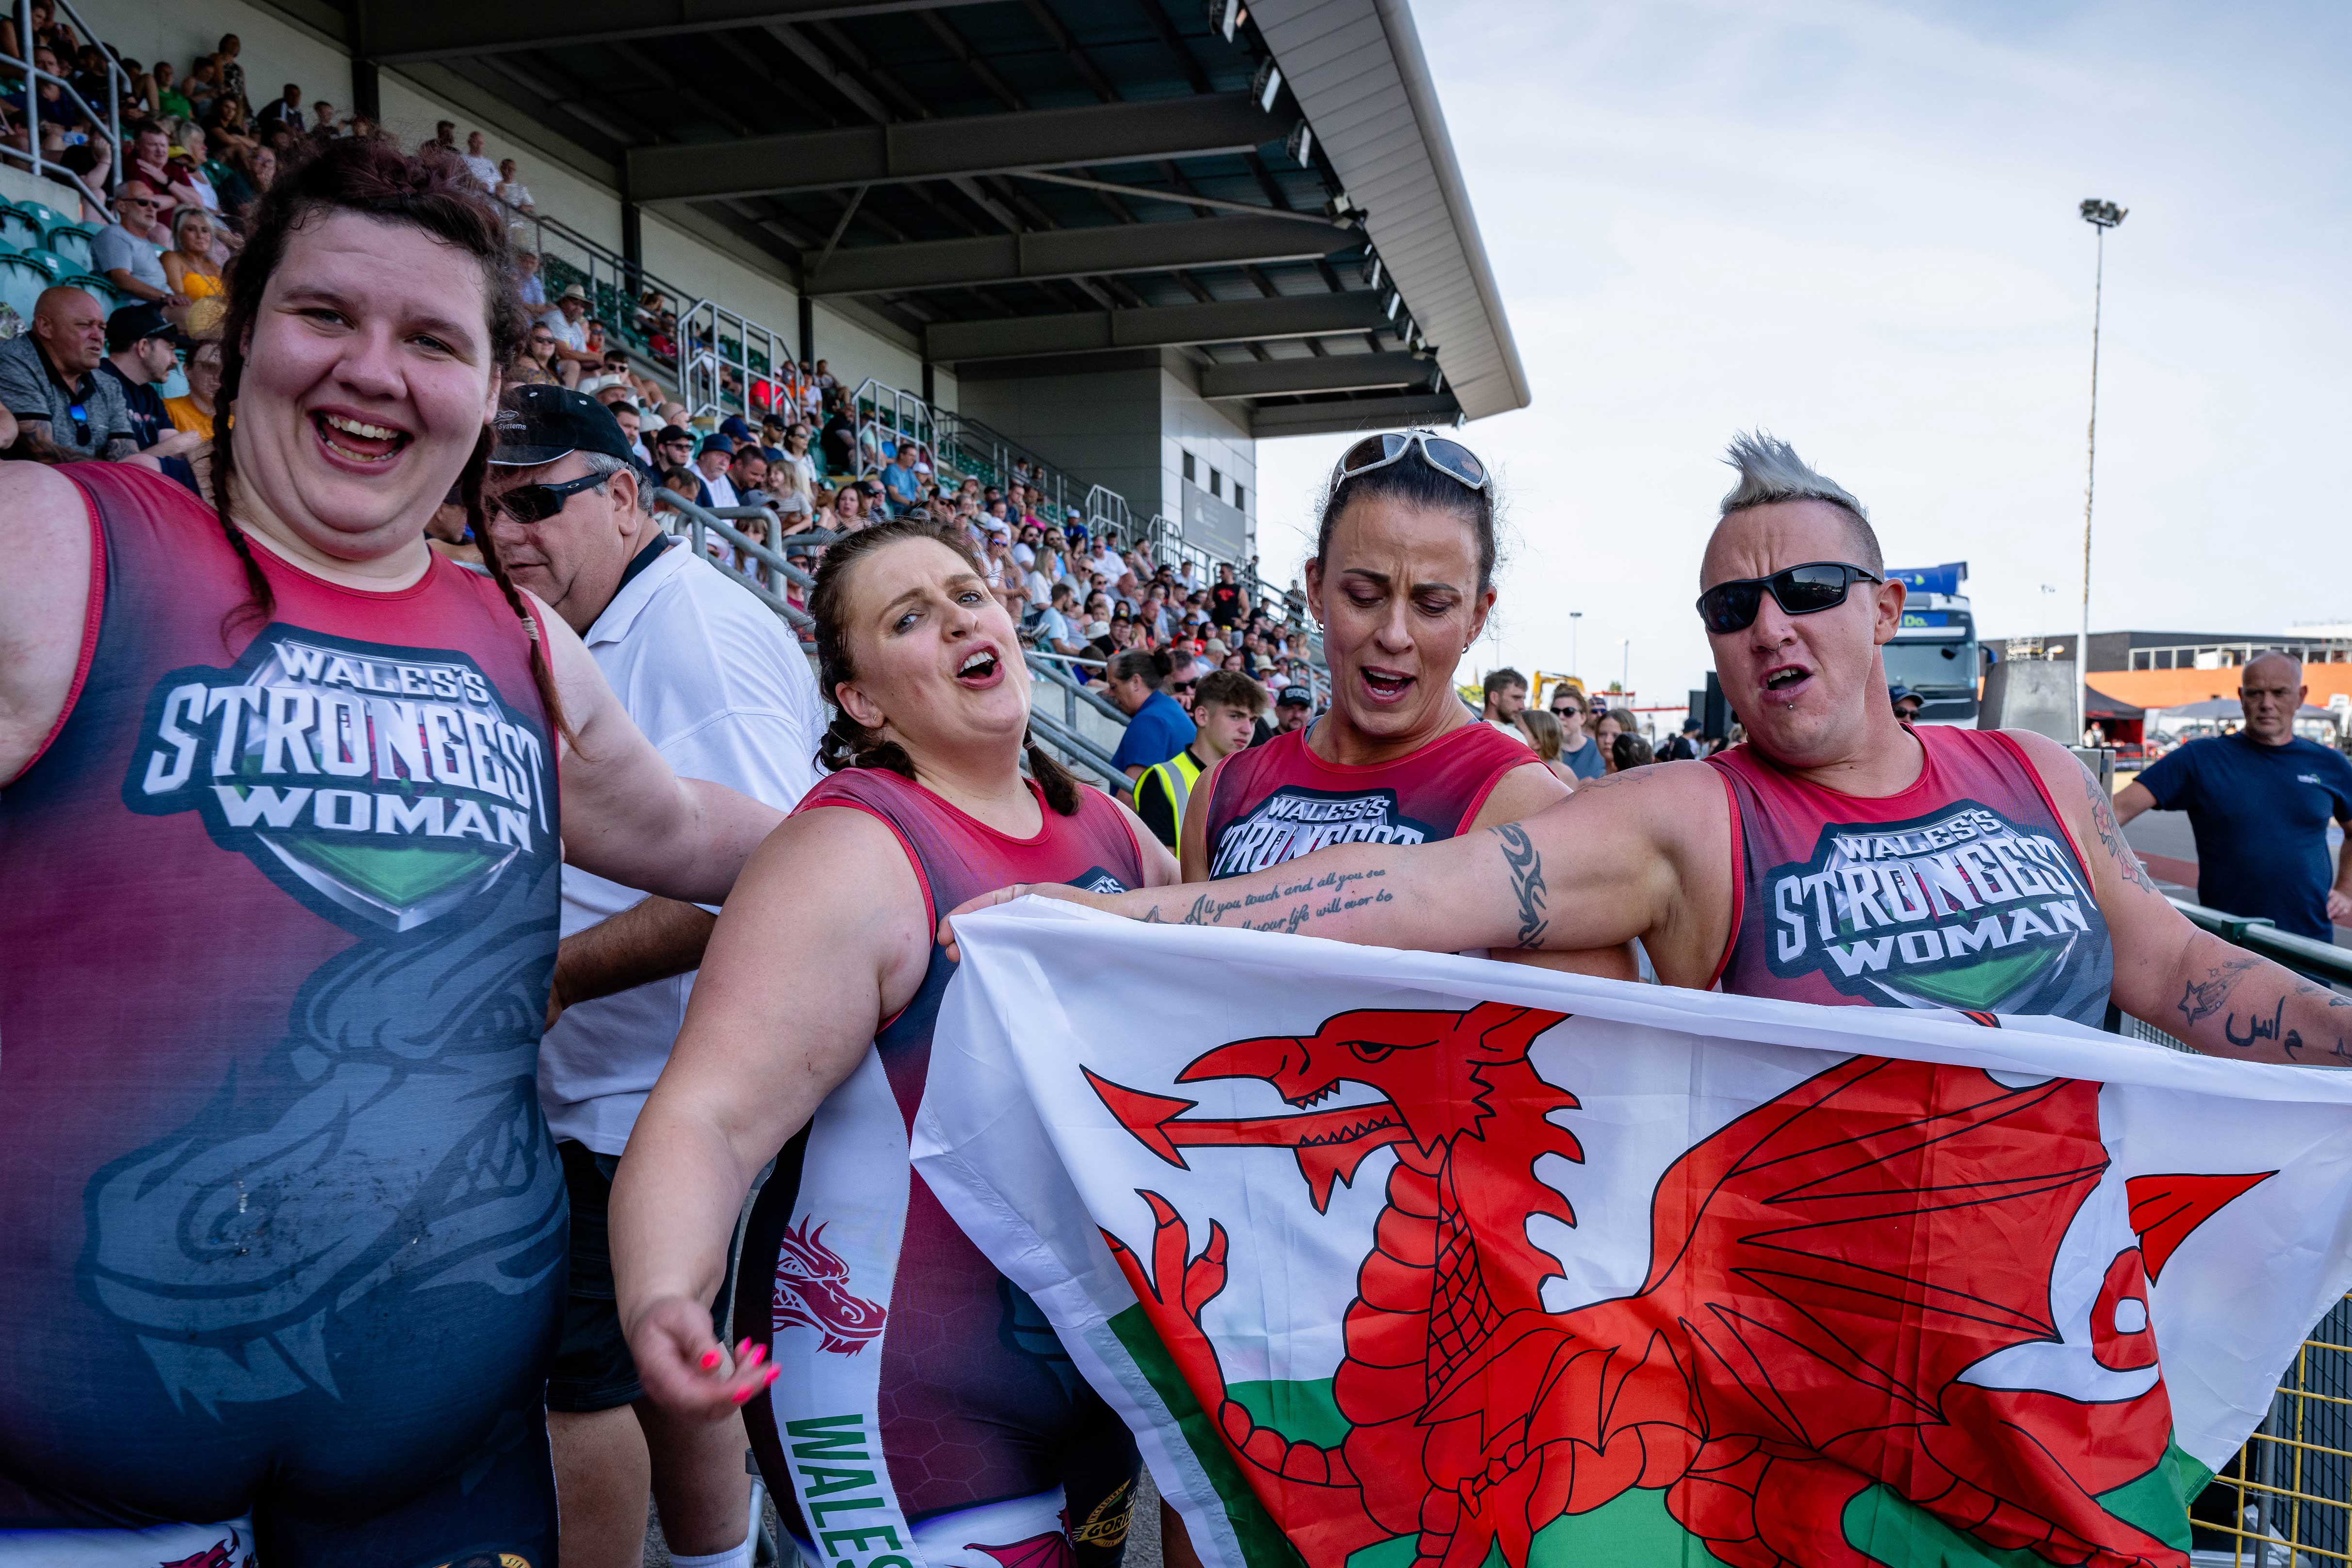 Ultimate Strongman » Wales’s Strongest Woman 2022 Results